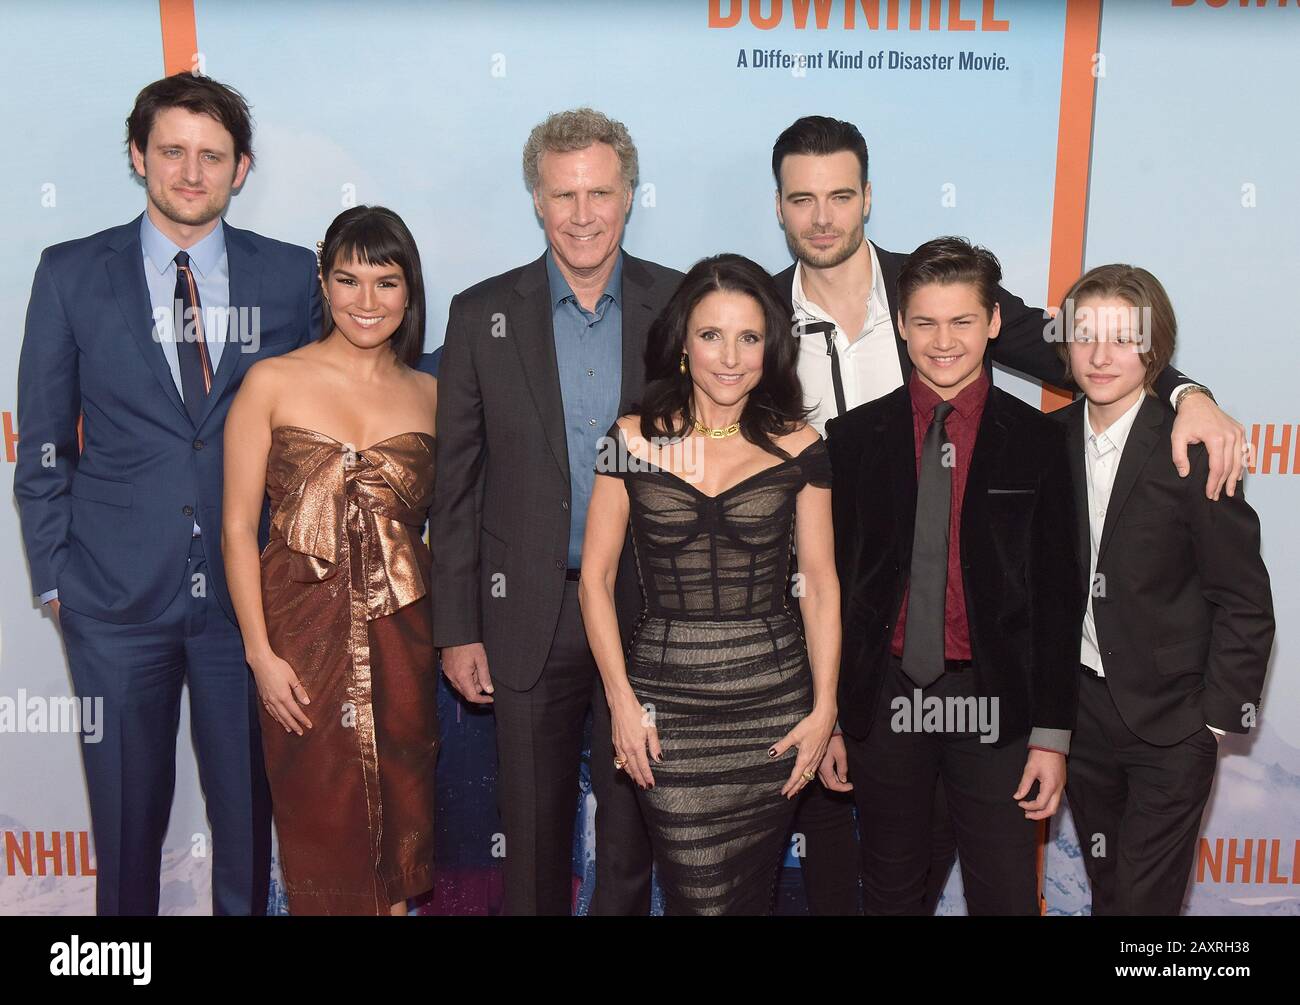 New York, USA. 12th Feb, 2020. Zach Woods, Jim Rash, Nat Faxon, Zoe Chao, Julia Louis-Dreyfus, Will Ferrell, Giulio Berruti, Ammon Jacob Ford and Julian Grey attend the premiere of 'Downhill' at SVA Theater on February 12, 2020 in New York City. Photo: Jeremy Smith/imageSPACE/MediaPunch Credit: MediaPunch Inc/Alamy Live News Stock Photo